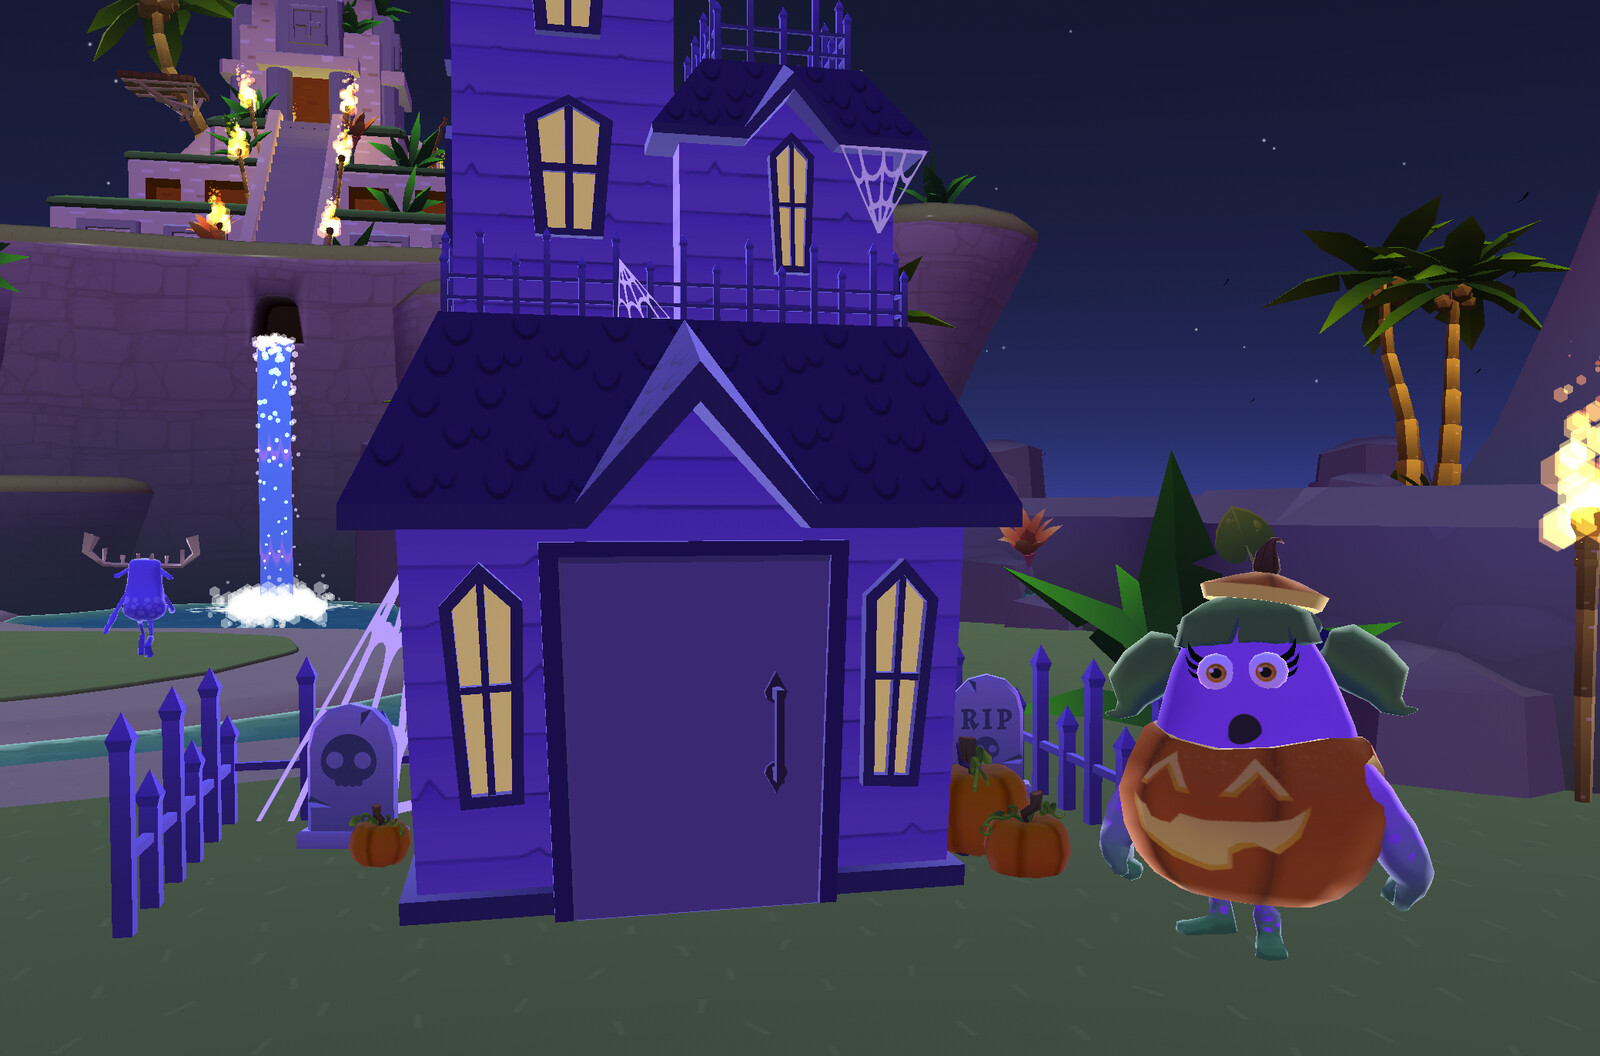 Jackie Lantern preparing to go into the creepy mansion! This update added spooky night time lighting to the normally bright island.